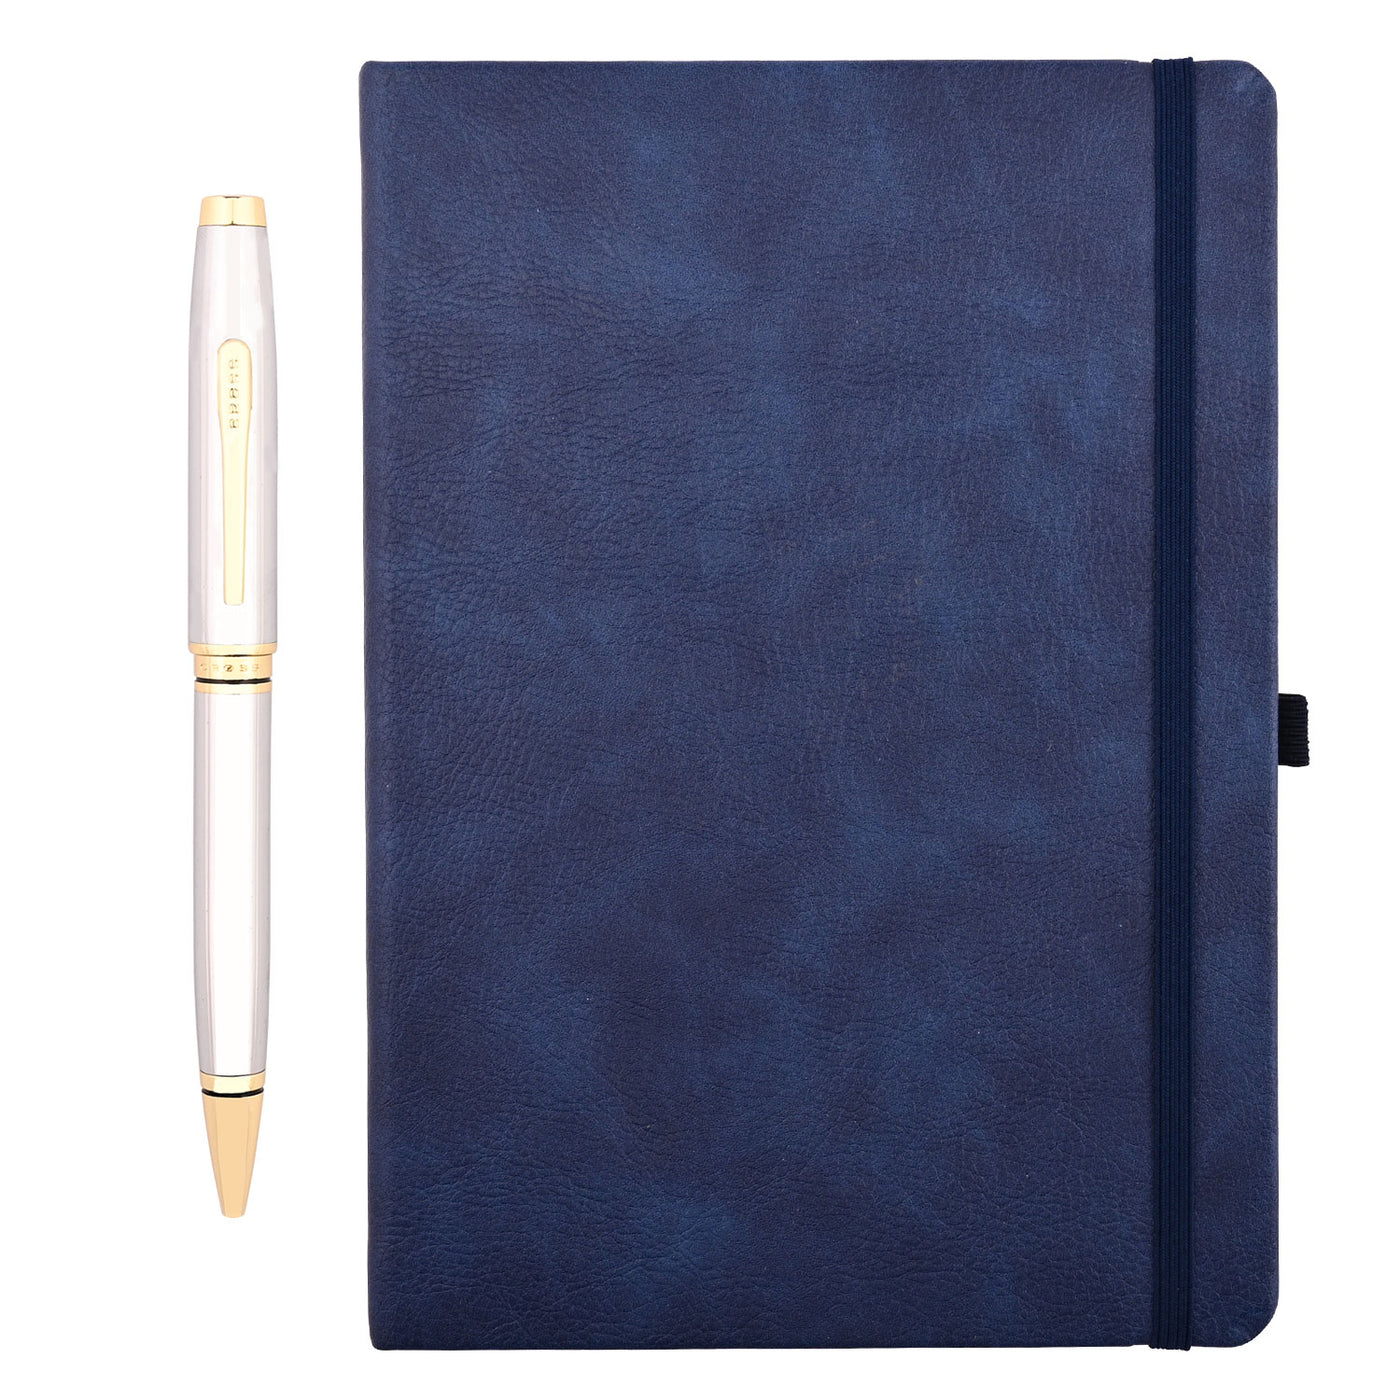 Cross Gift Set - Coventry Medalist Ball Pen with Blue A5 Notebook 1